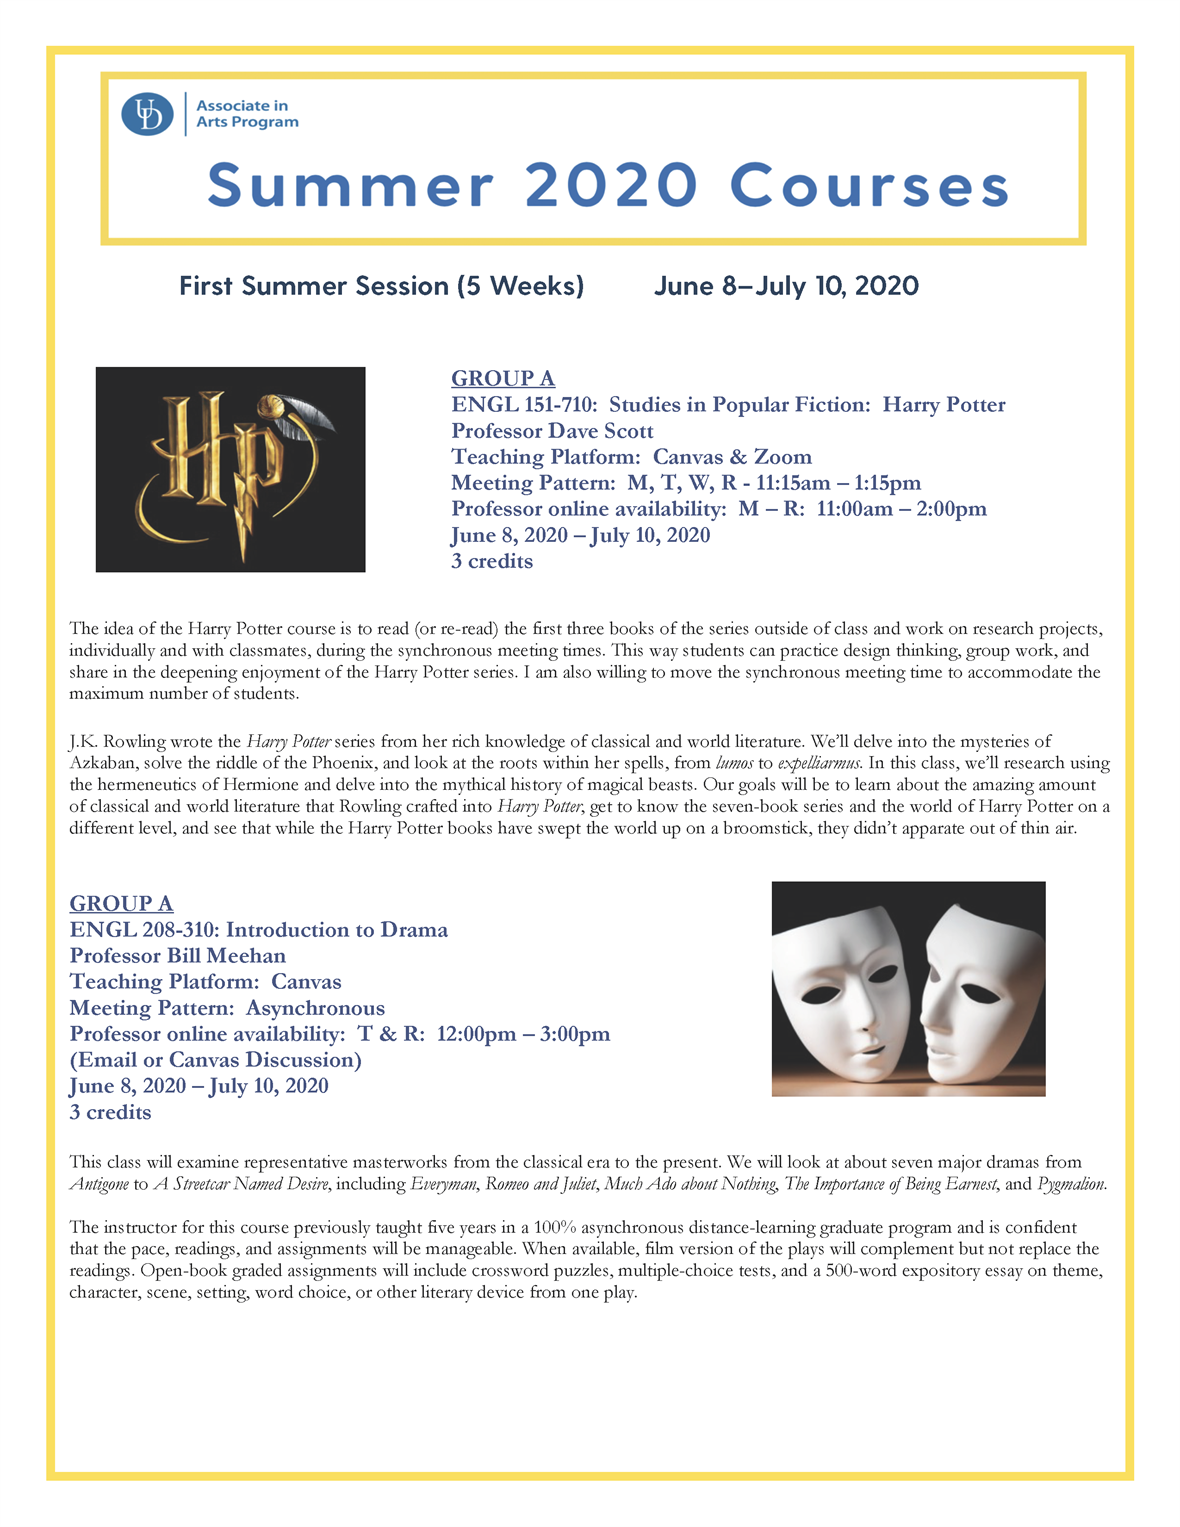 UD Summer Courses 